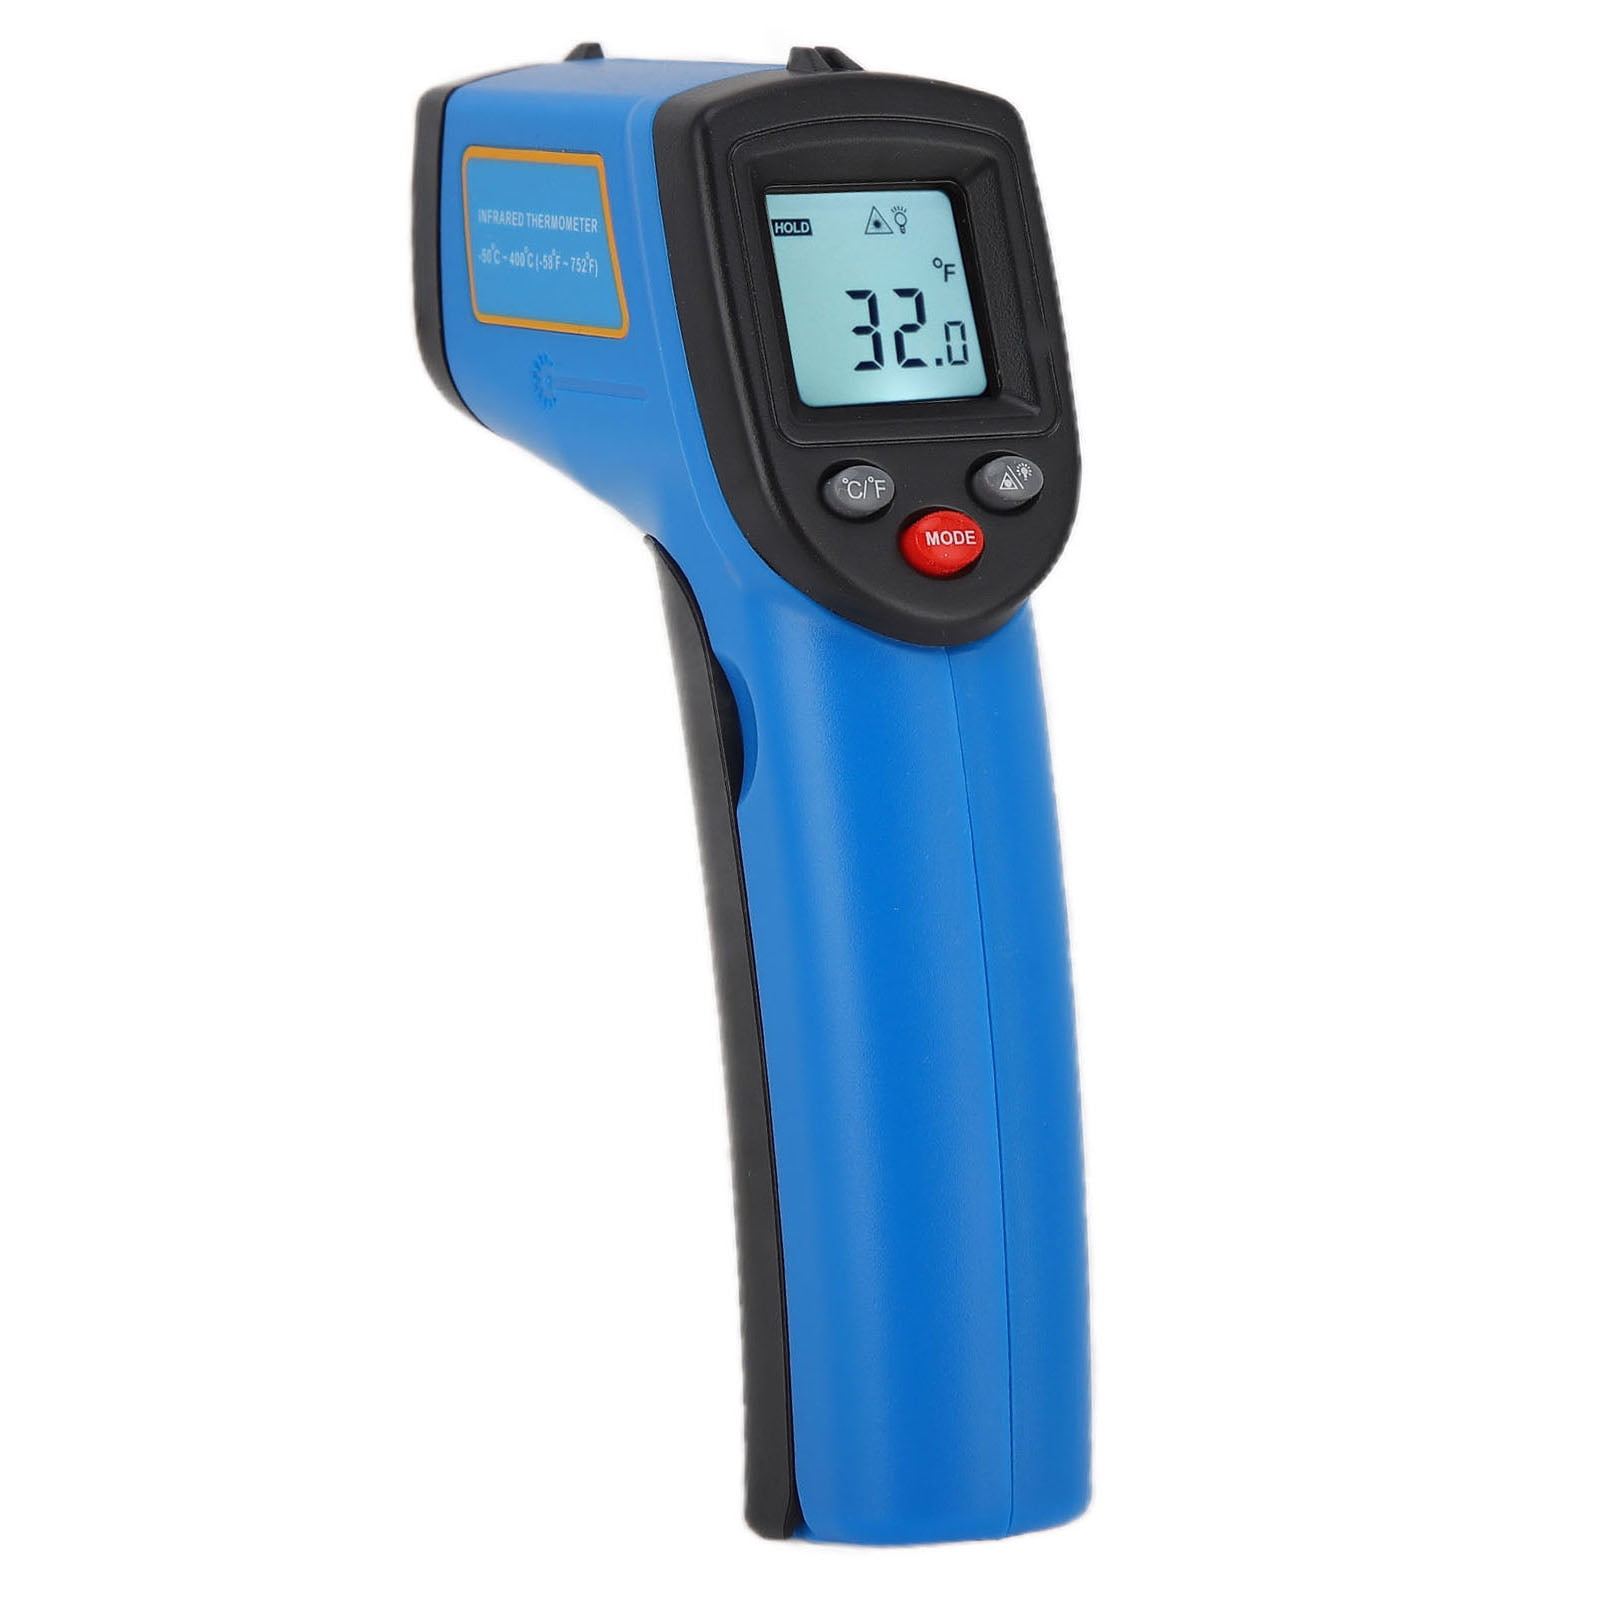 likeitwell Digital Thermometer Tester Non-contact Temperature Display Industrial Point Temp Test-tool like-minded 